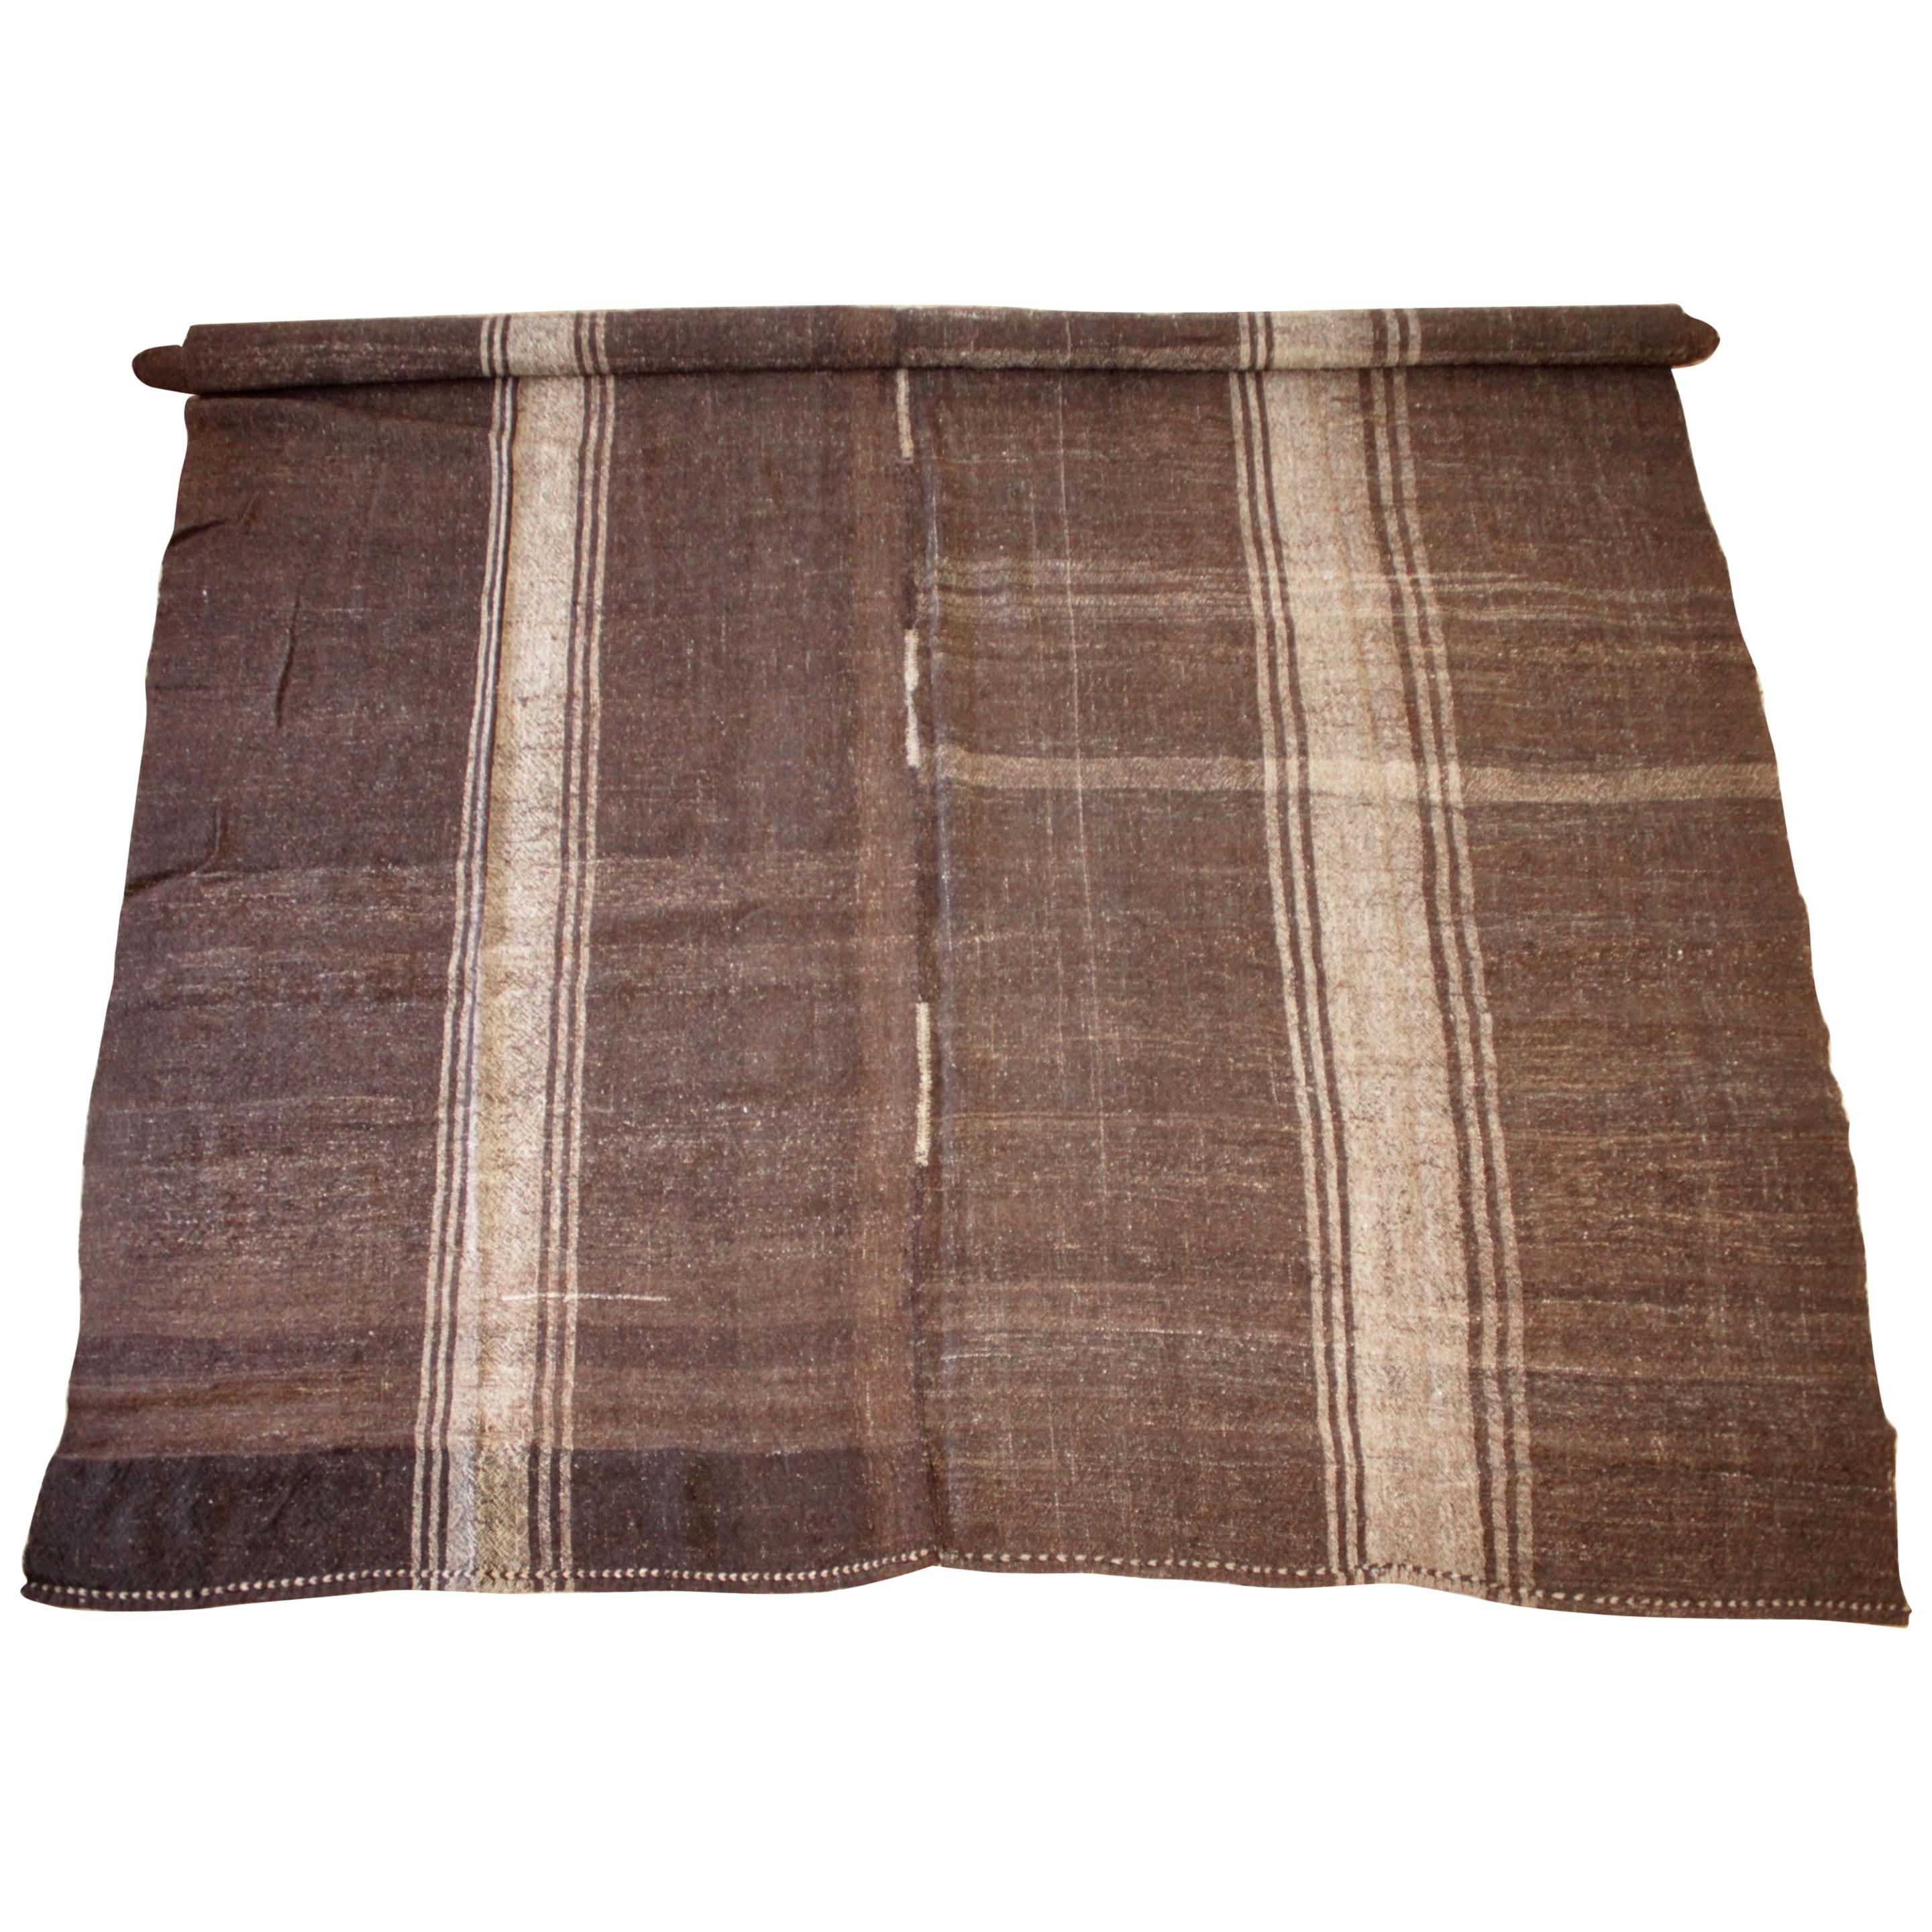 Vintage Turkish Rug in Cocoa Brown and Light Natural Stripes Double Wide For Sale